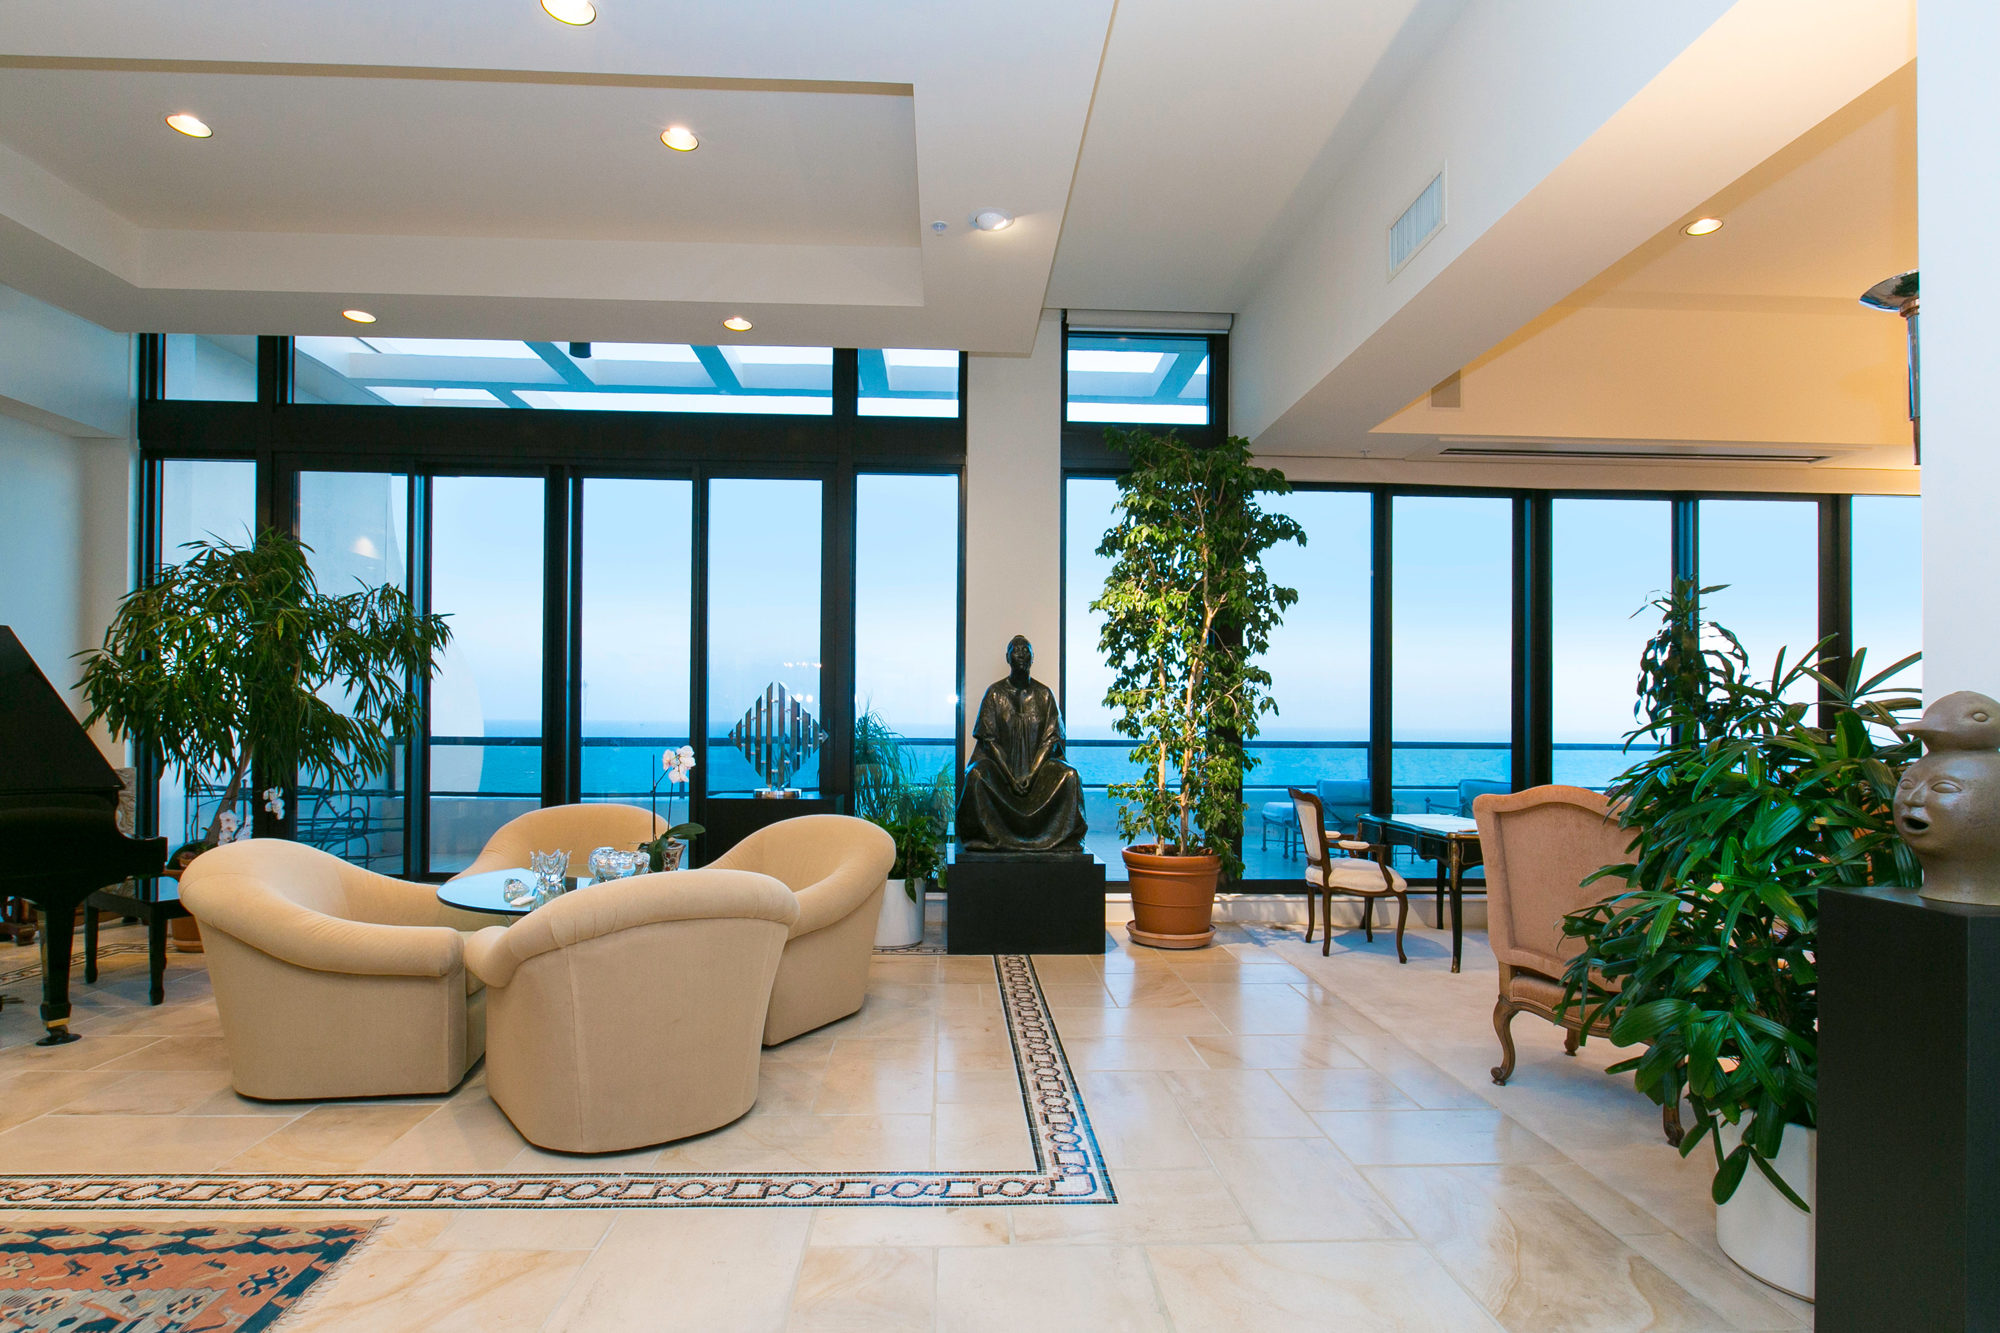 Penthouse C at L'Ambiance is listed for $7 million.